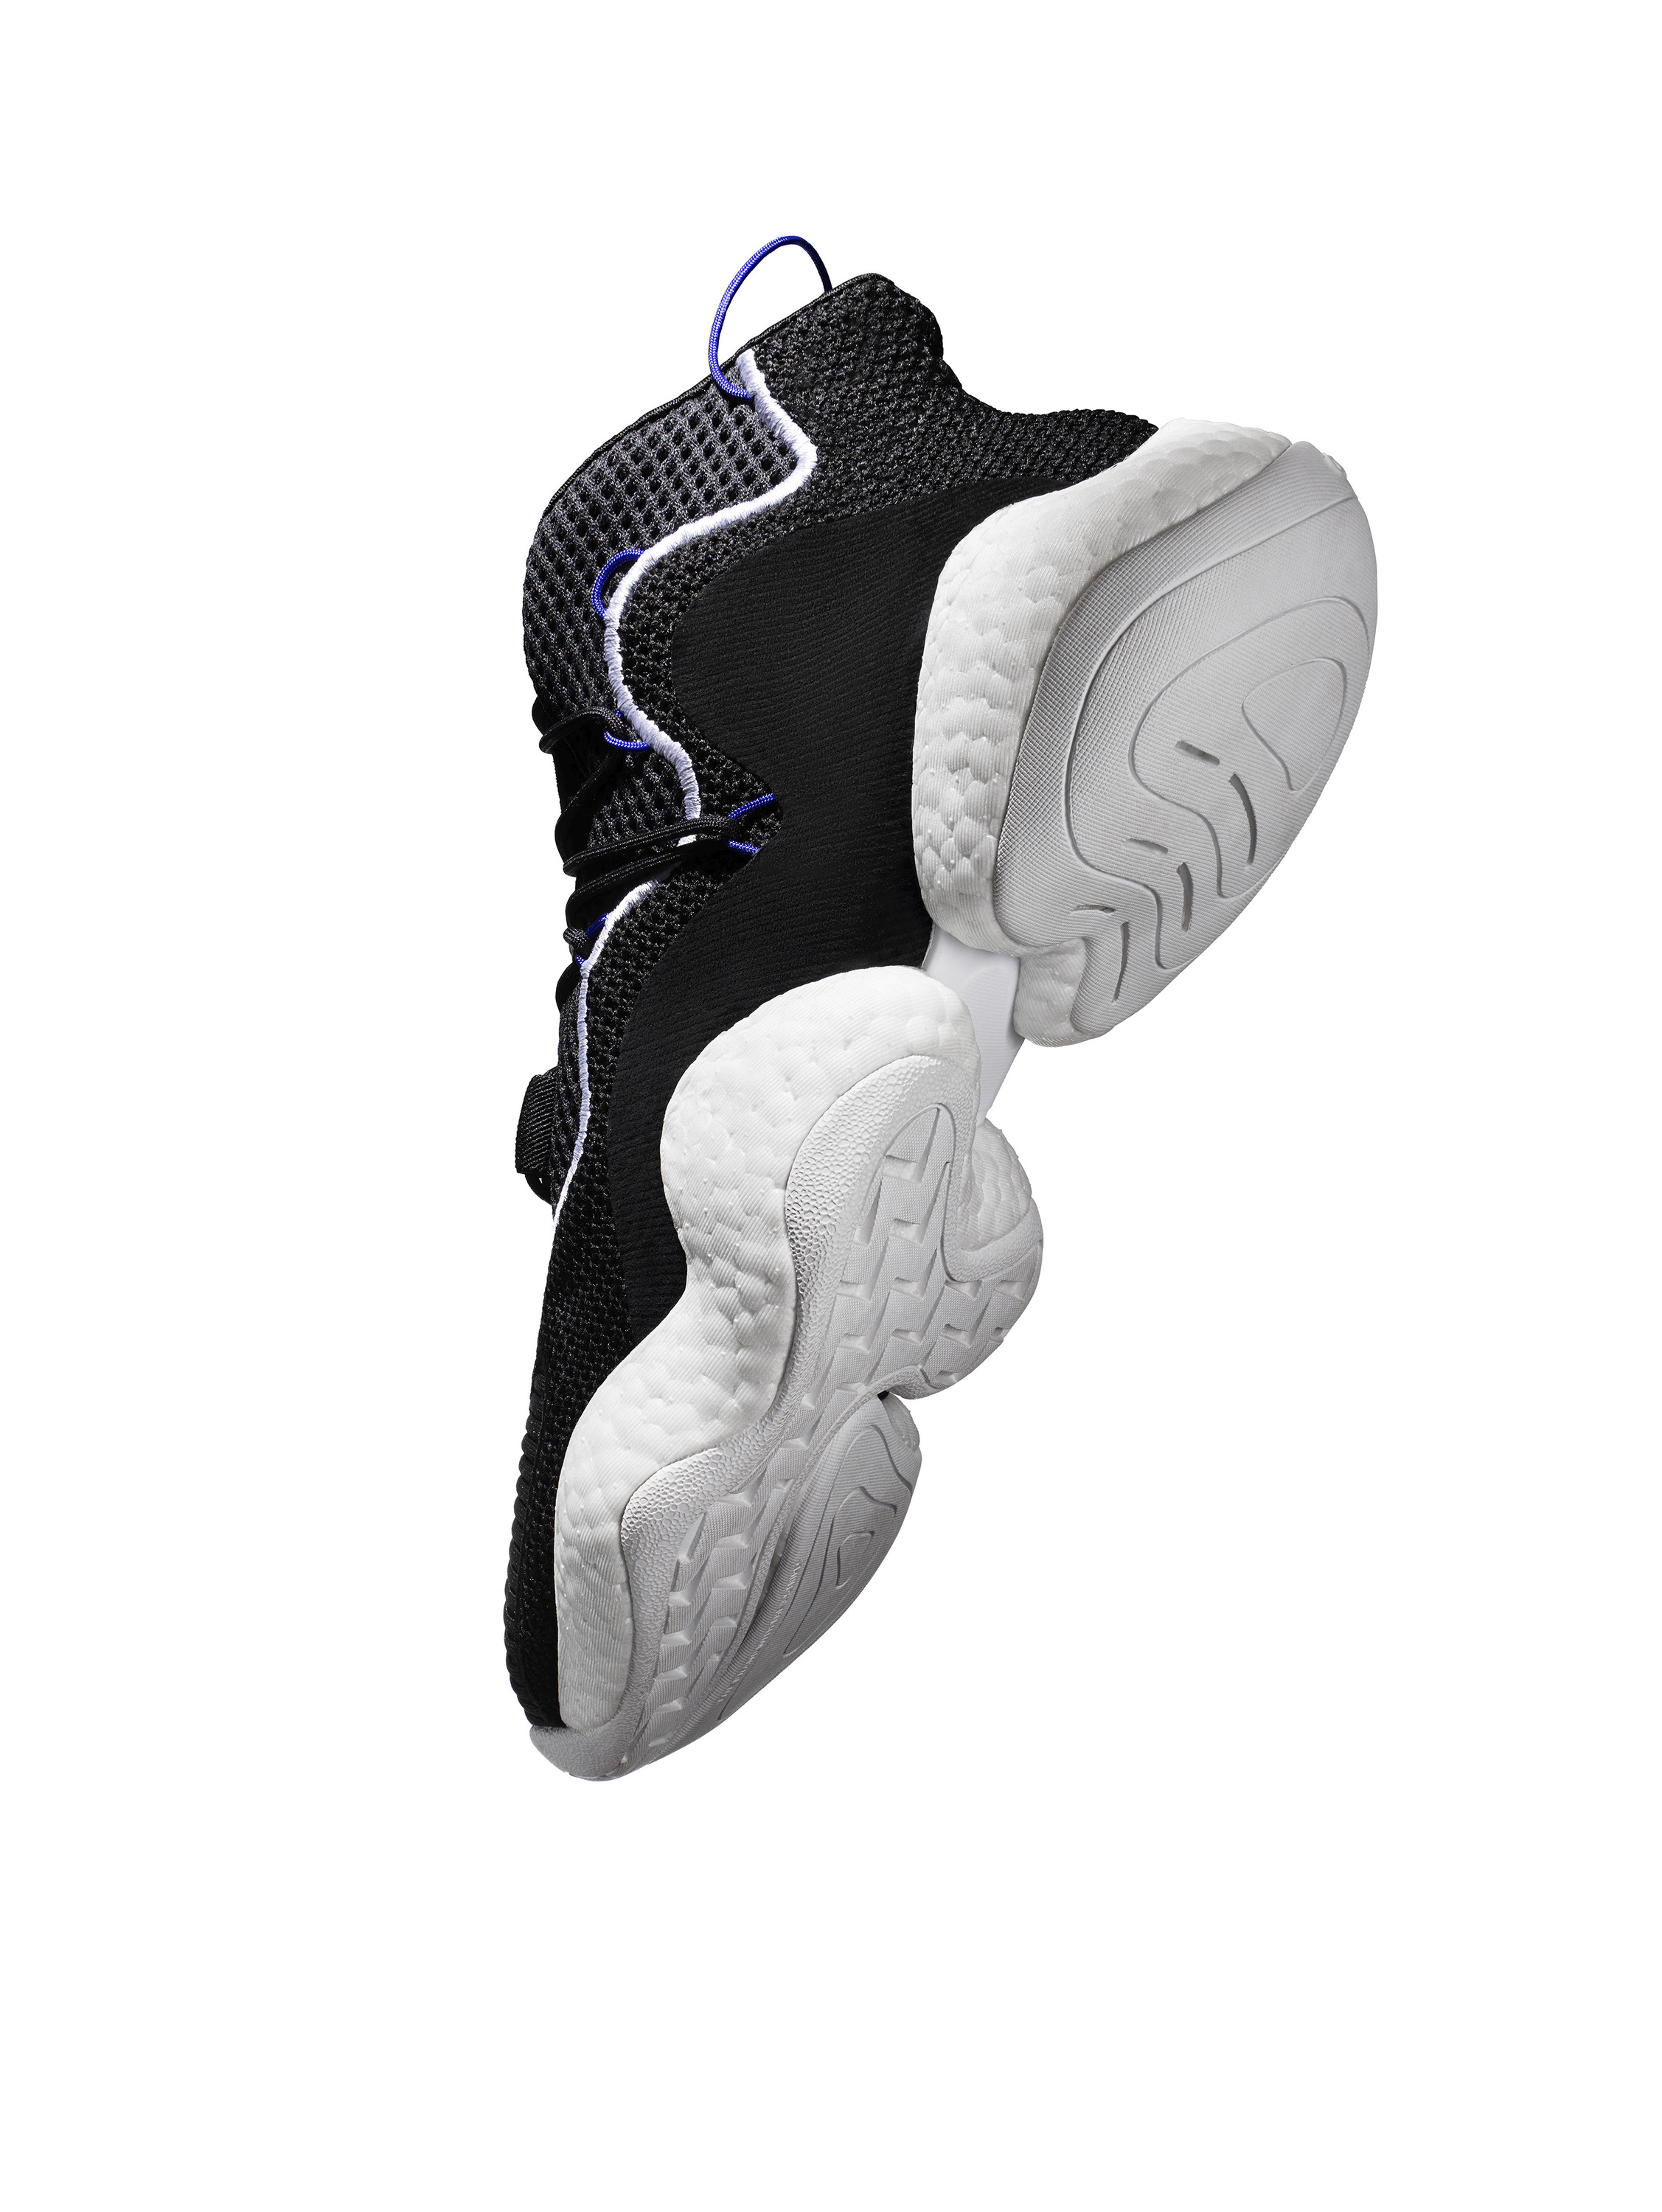 adidas crazy BYW official 2